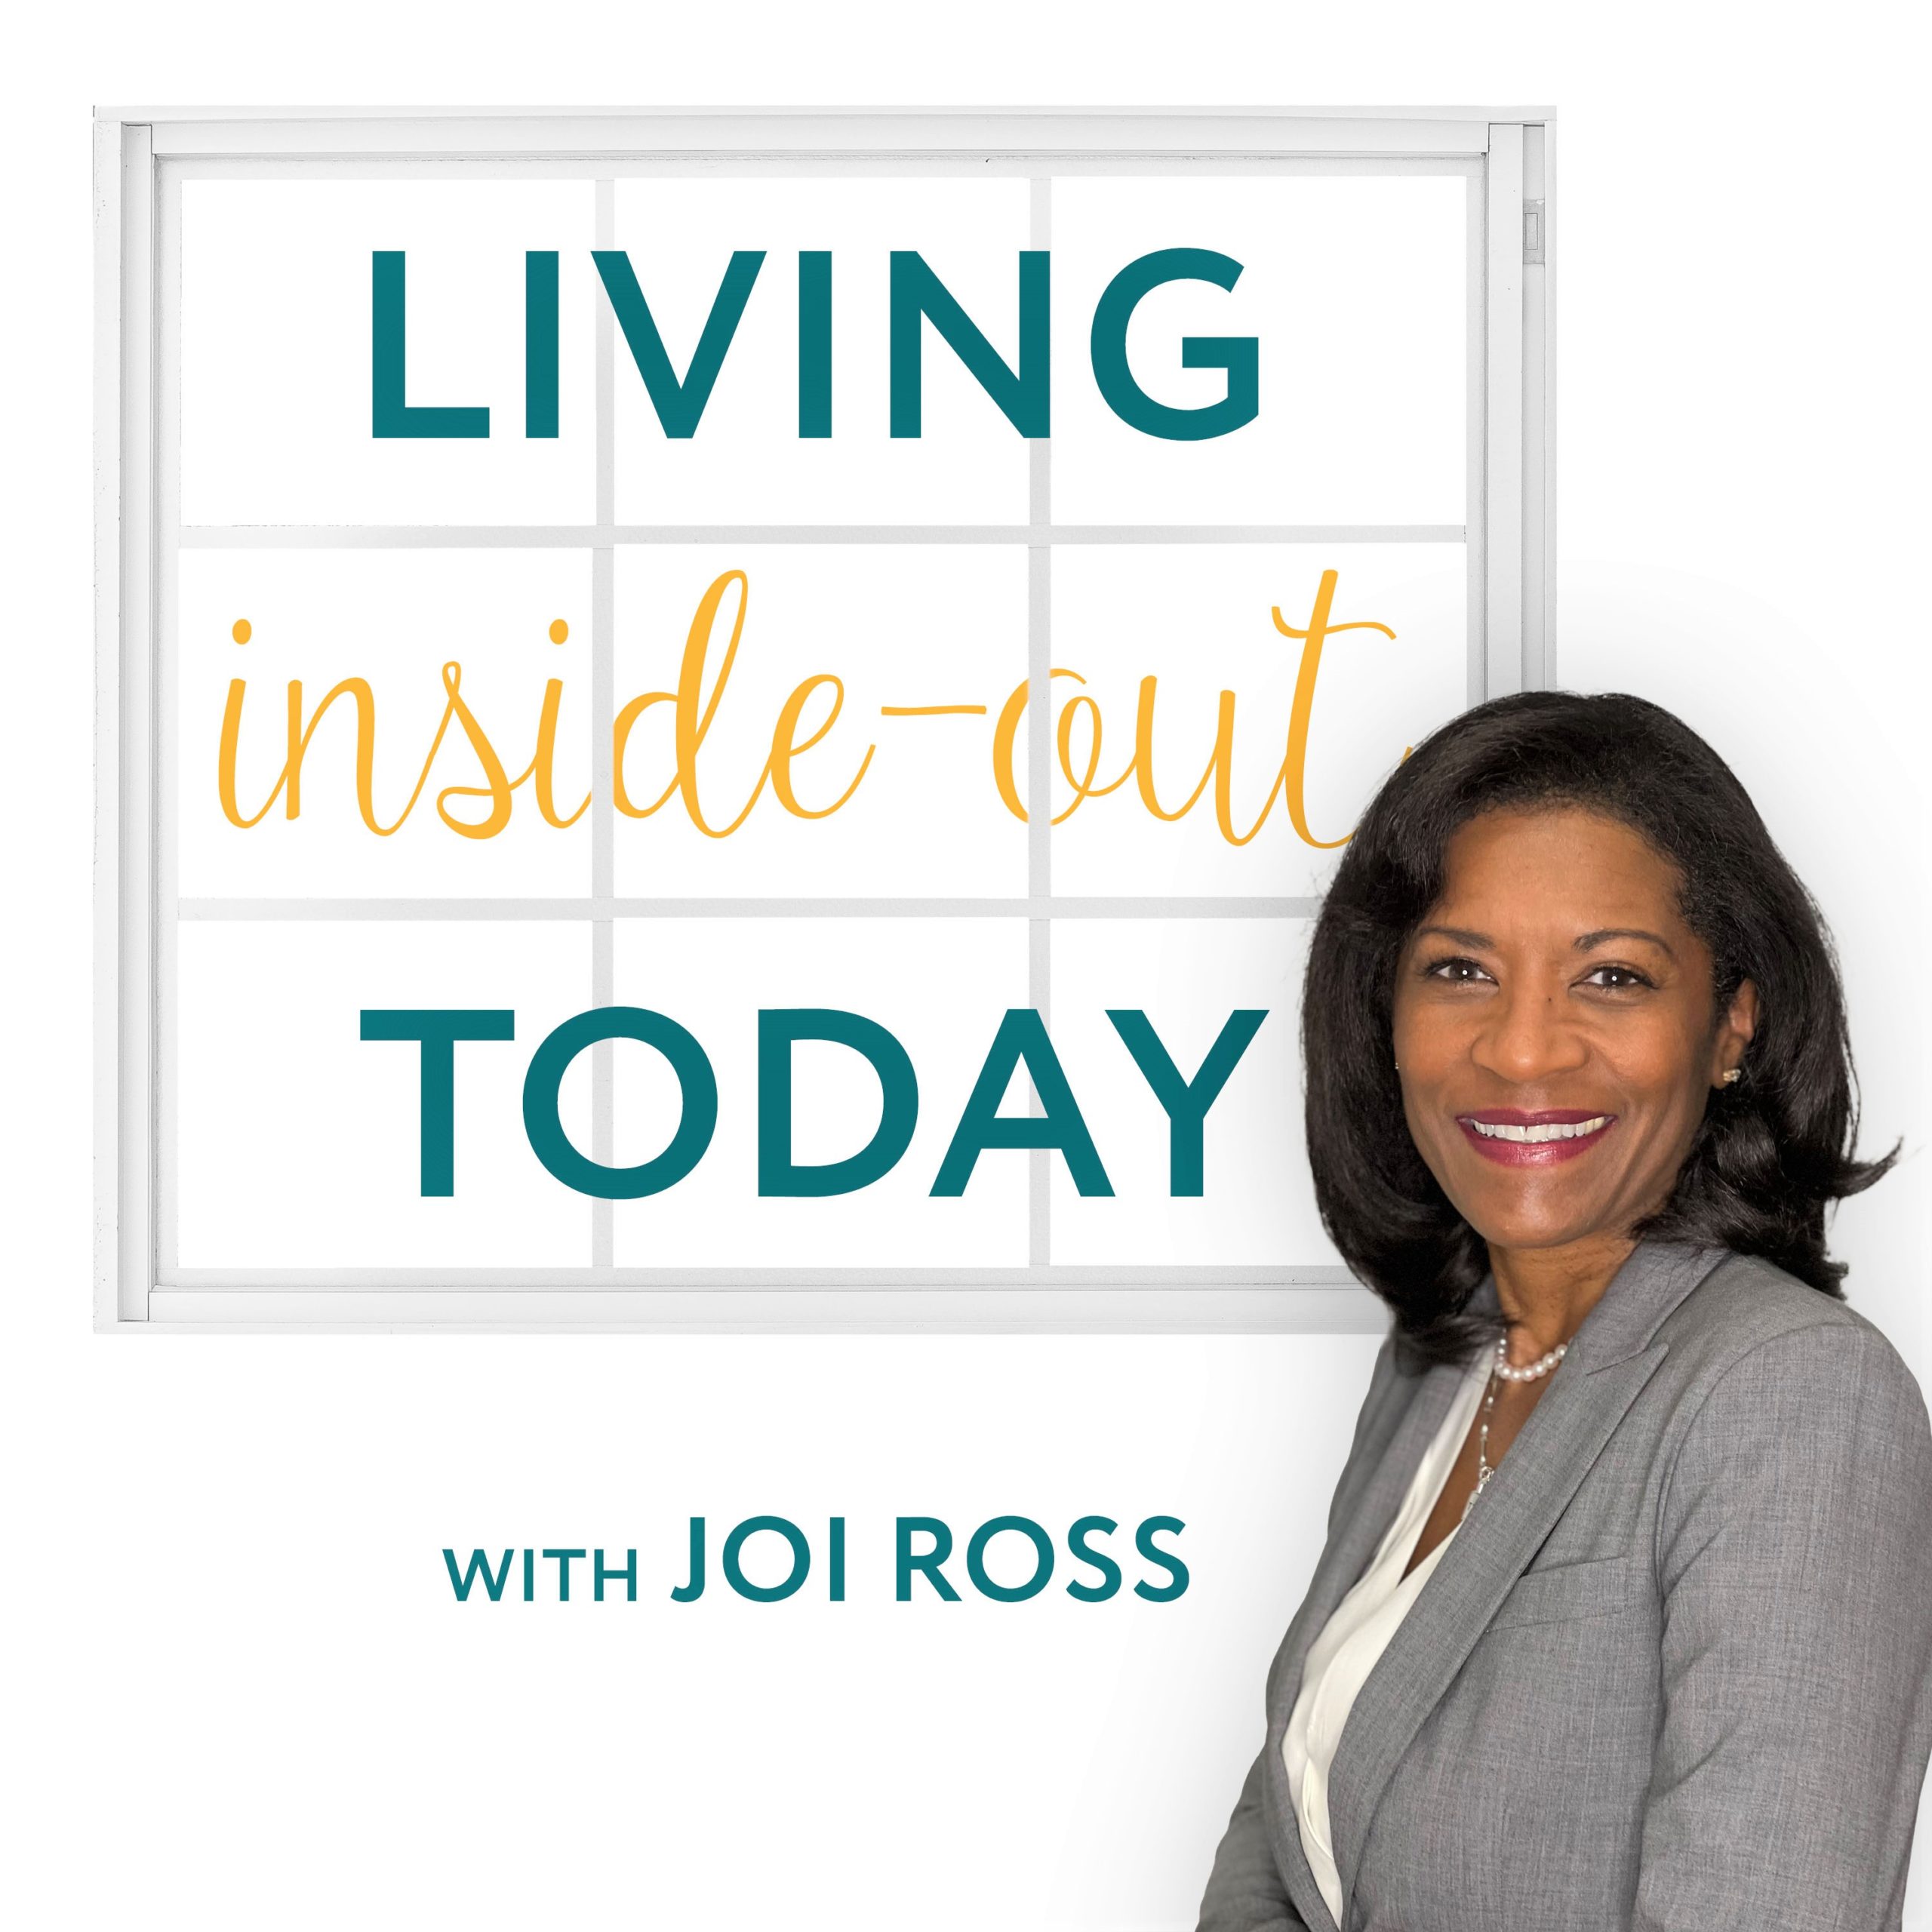 Joi Ross launches her live internet-based radio show and podcast  called “Living Inside-Out Today.”